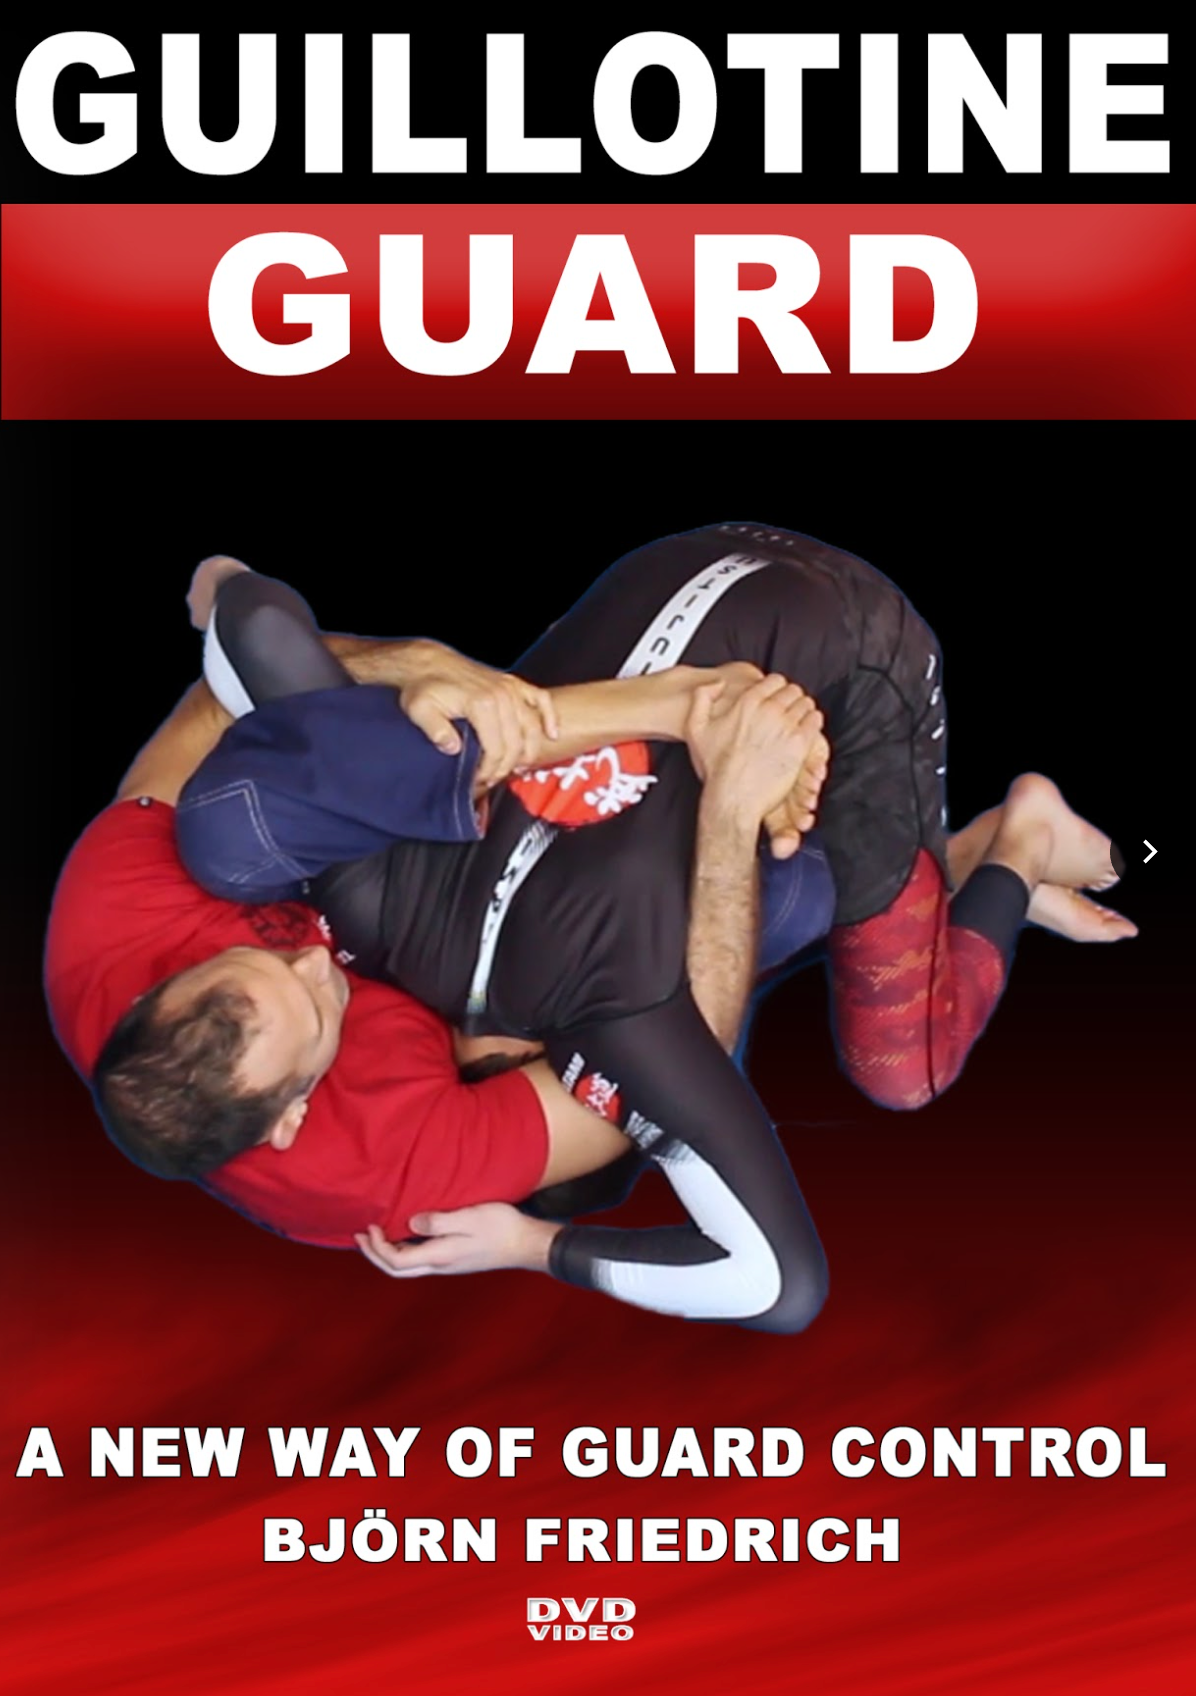 Guillotine Guard 2 DVD Set with Bjorn Friedrich - Budovideos